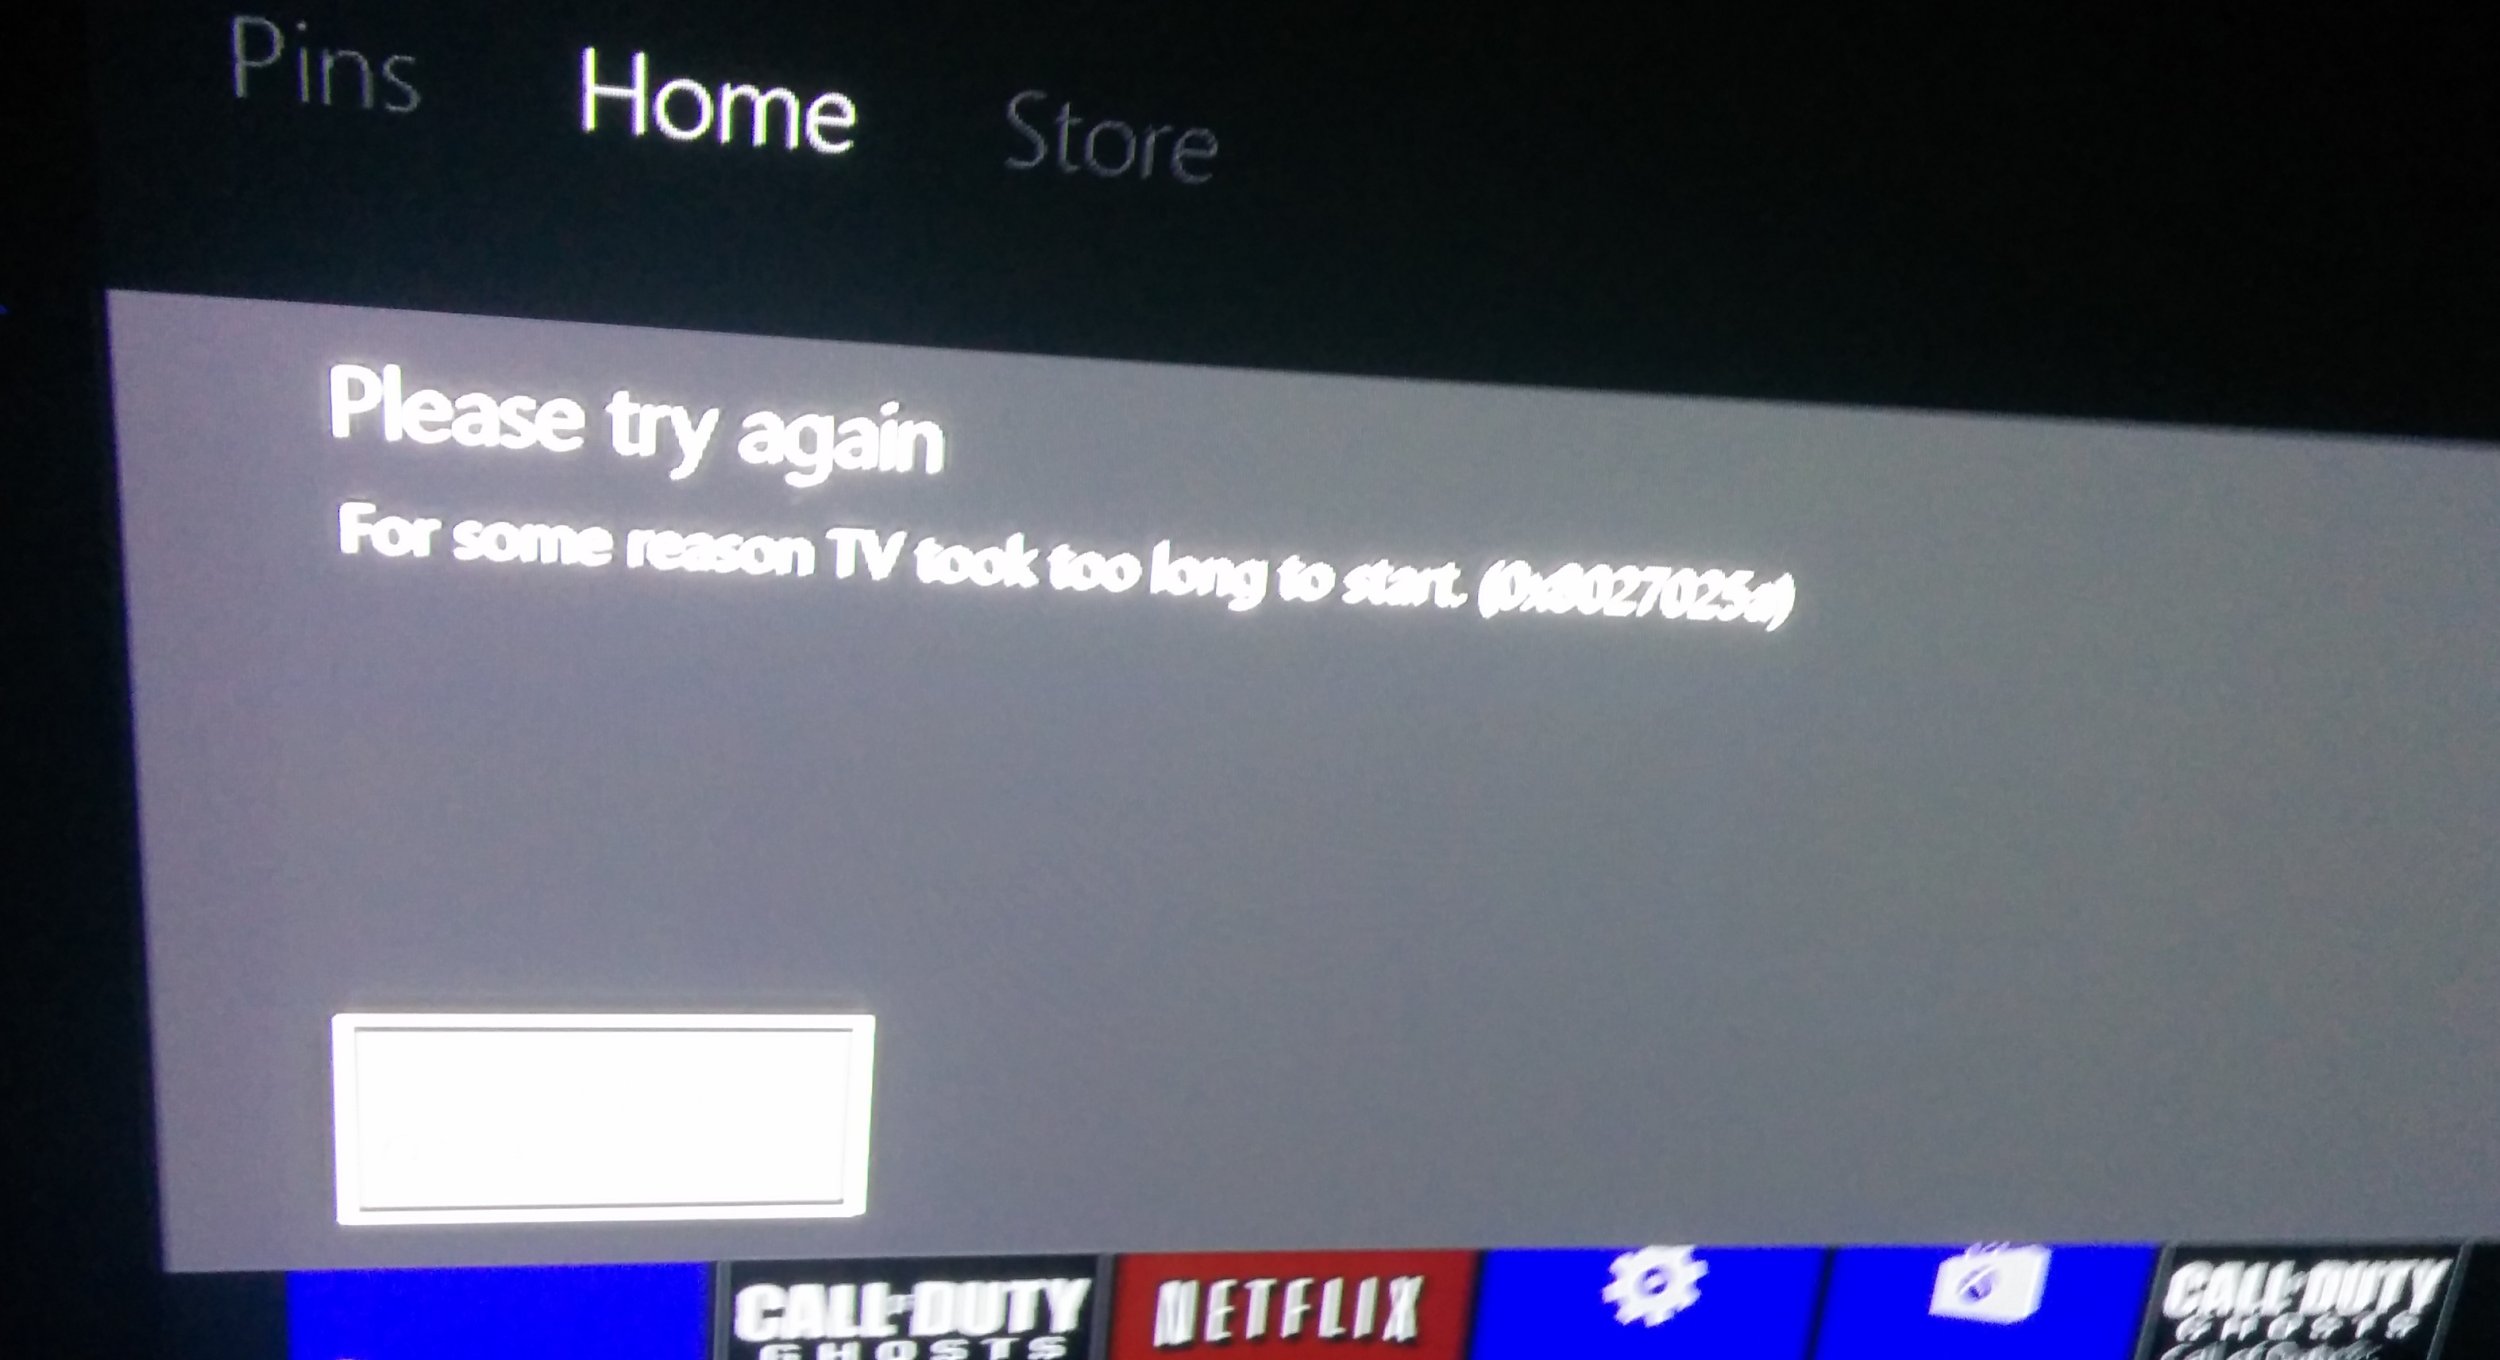 Xbox One “For Some Too Long To Start (0x8027025a)” Error Message: How To TV Problem